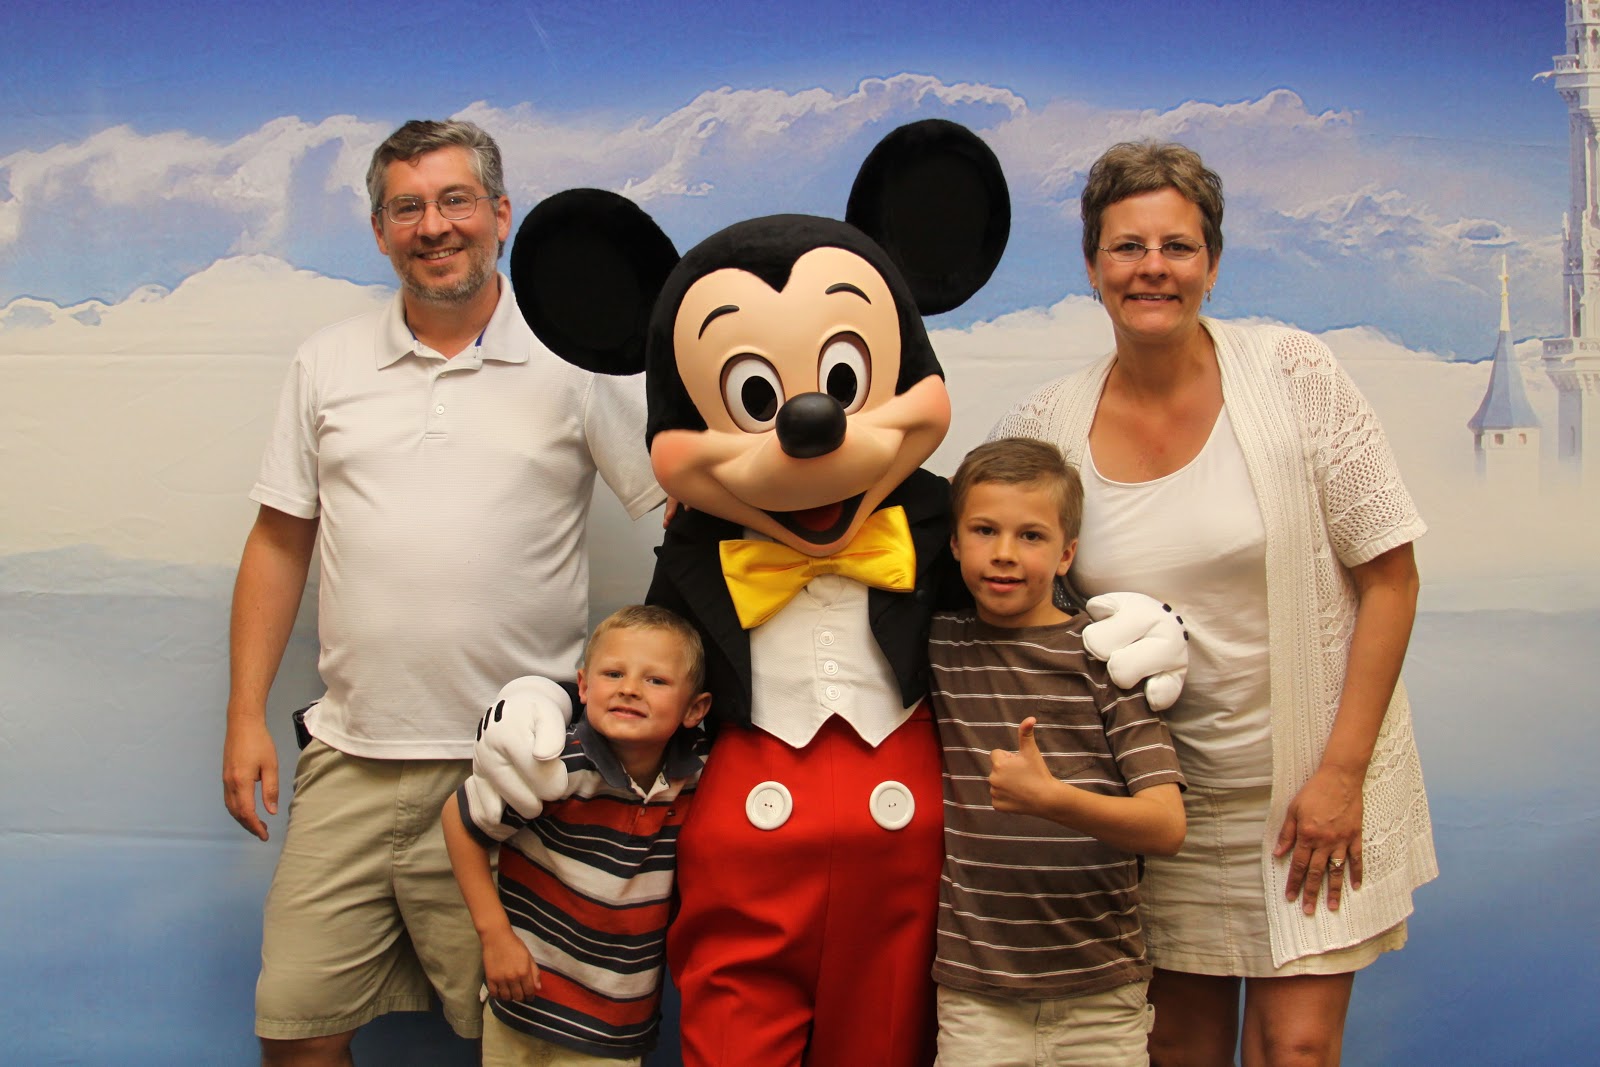 The Jeschke family met the world’s most famous mouse on their Legacy RetreatⓇ